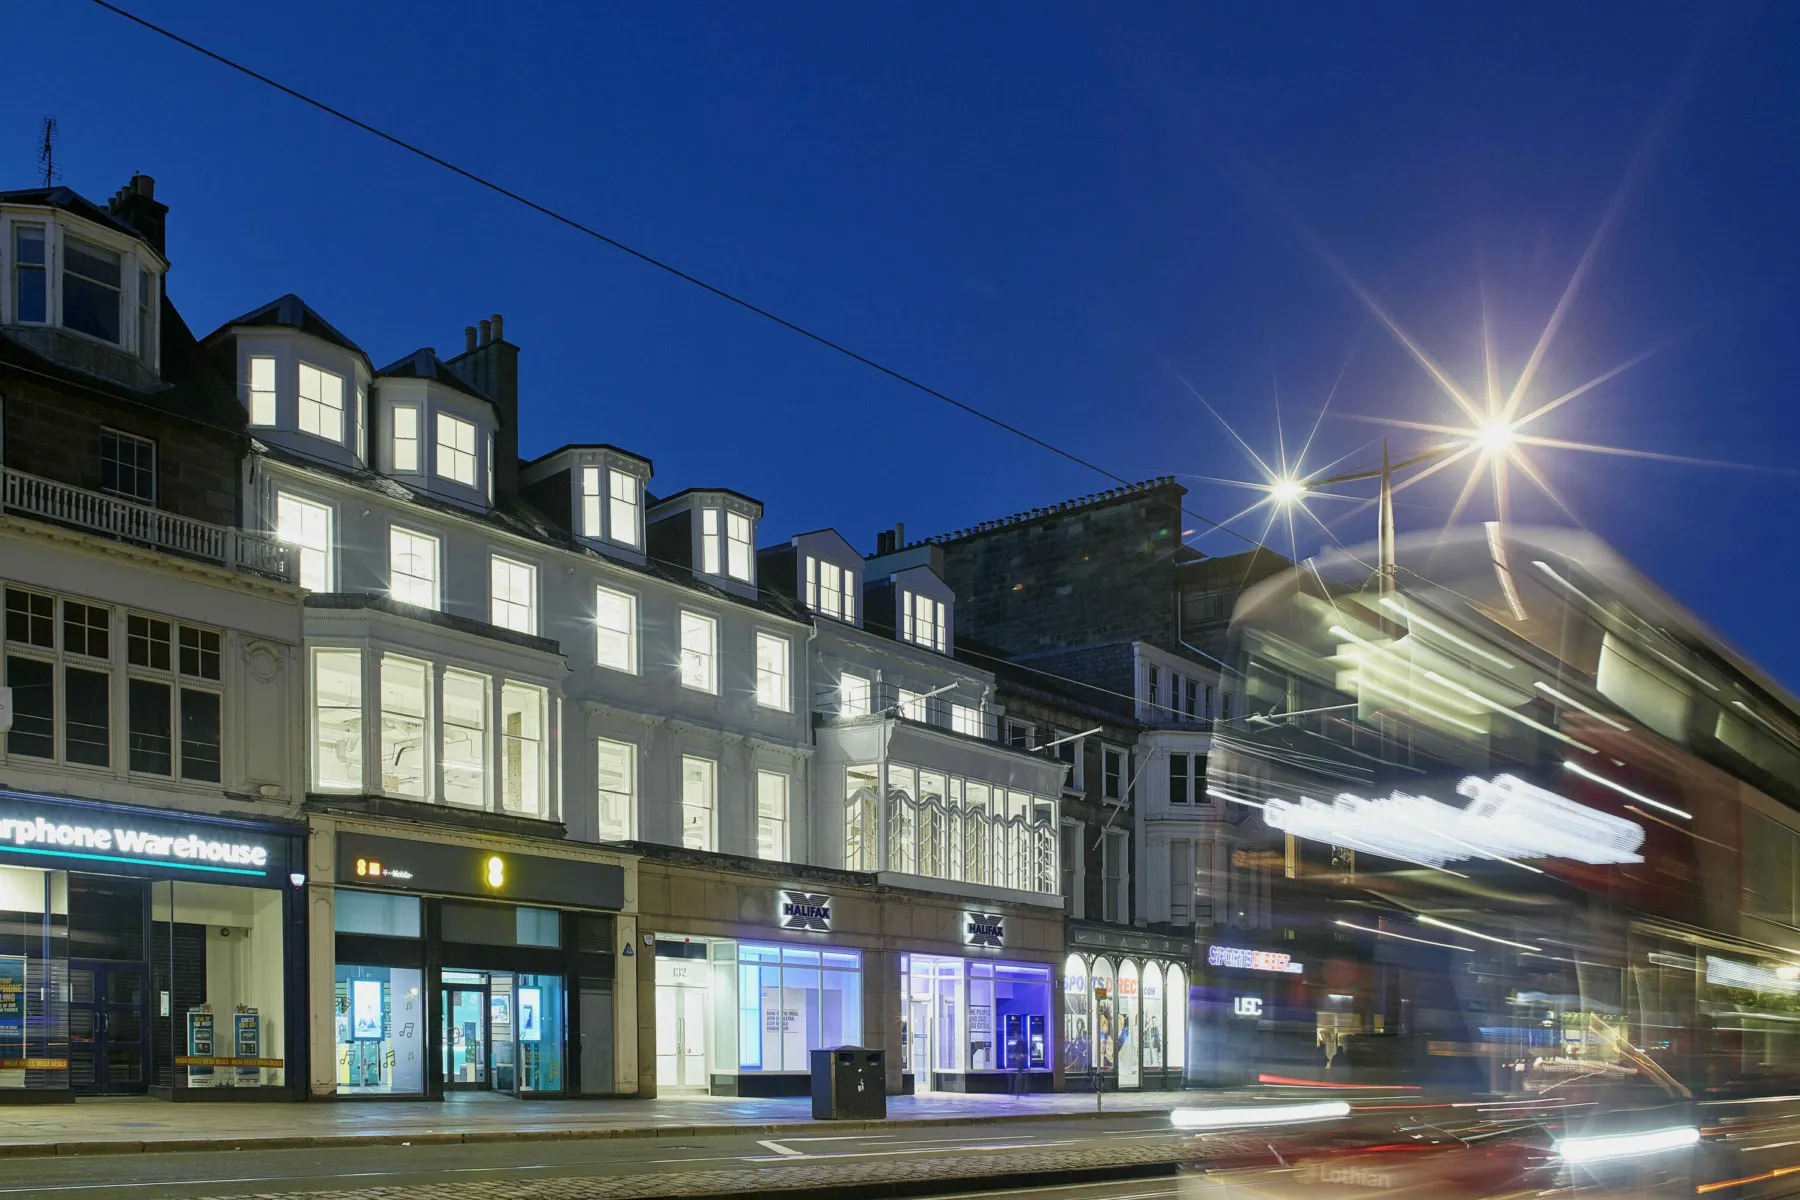 A nighttime view of Princes Street, Edinburgh. In the foreground a bus moves (shown out of focus, in motion). In the mid ground a range of offices including the listed building at 132 Princes St. The upper three storeys are refurbished office accommodation and are lit up from within.